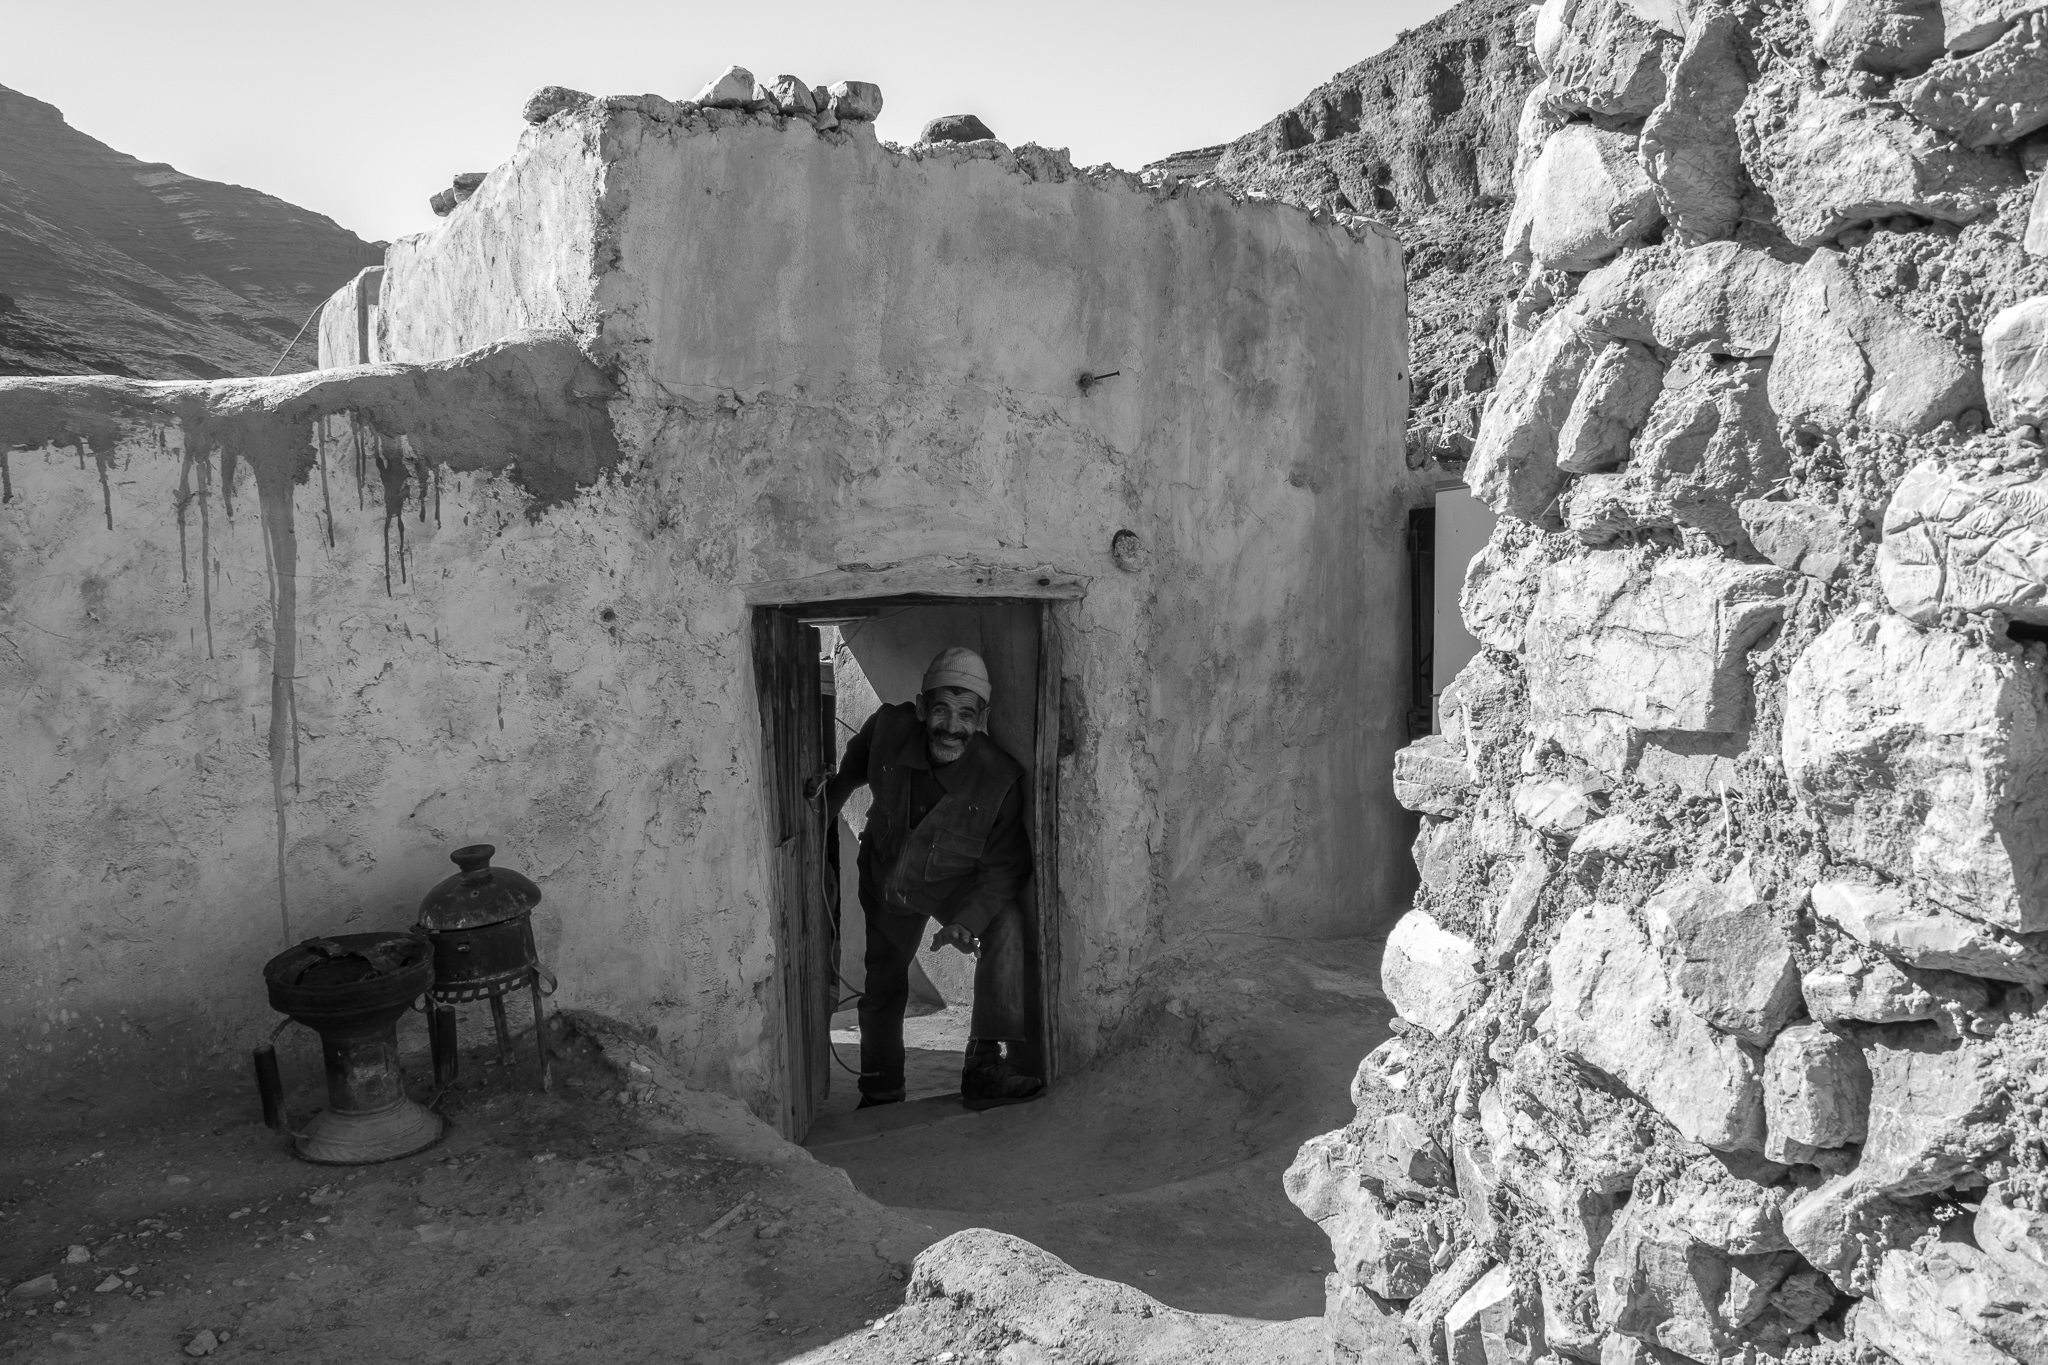 Thanks to a strong family relationship, the Amazigh learned to build and maintain their homes with their own hands using the materials of the mountain. <br> They mainly use a clay-based mass, straw, and water to build the stone walls, and cover their ceilings with wood and straw before sealing them.